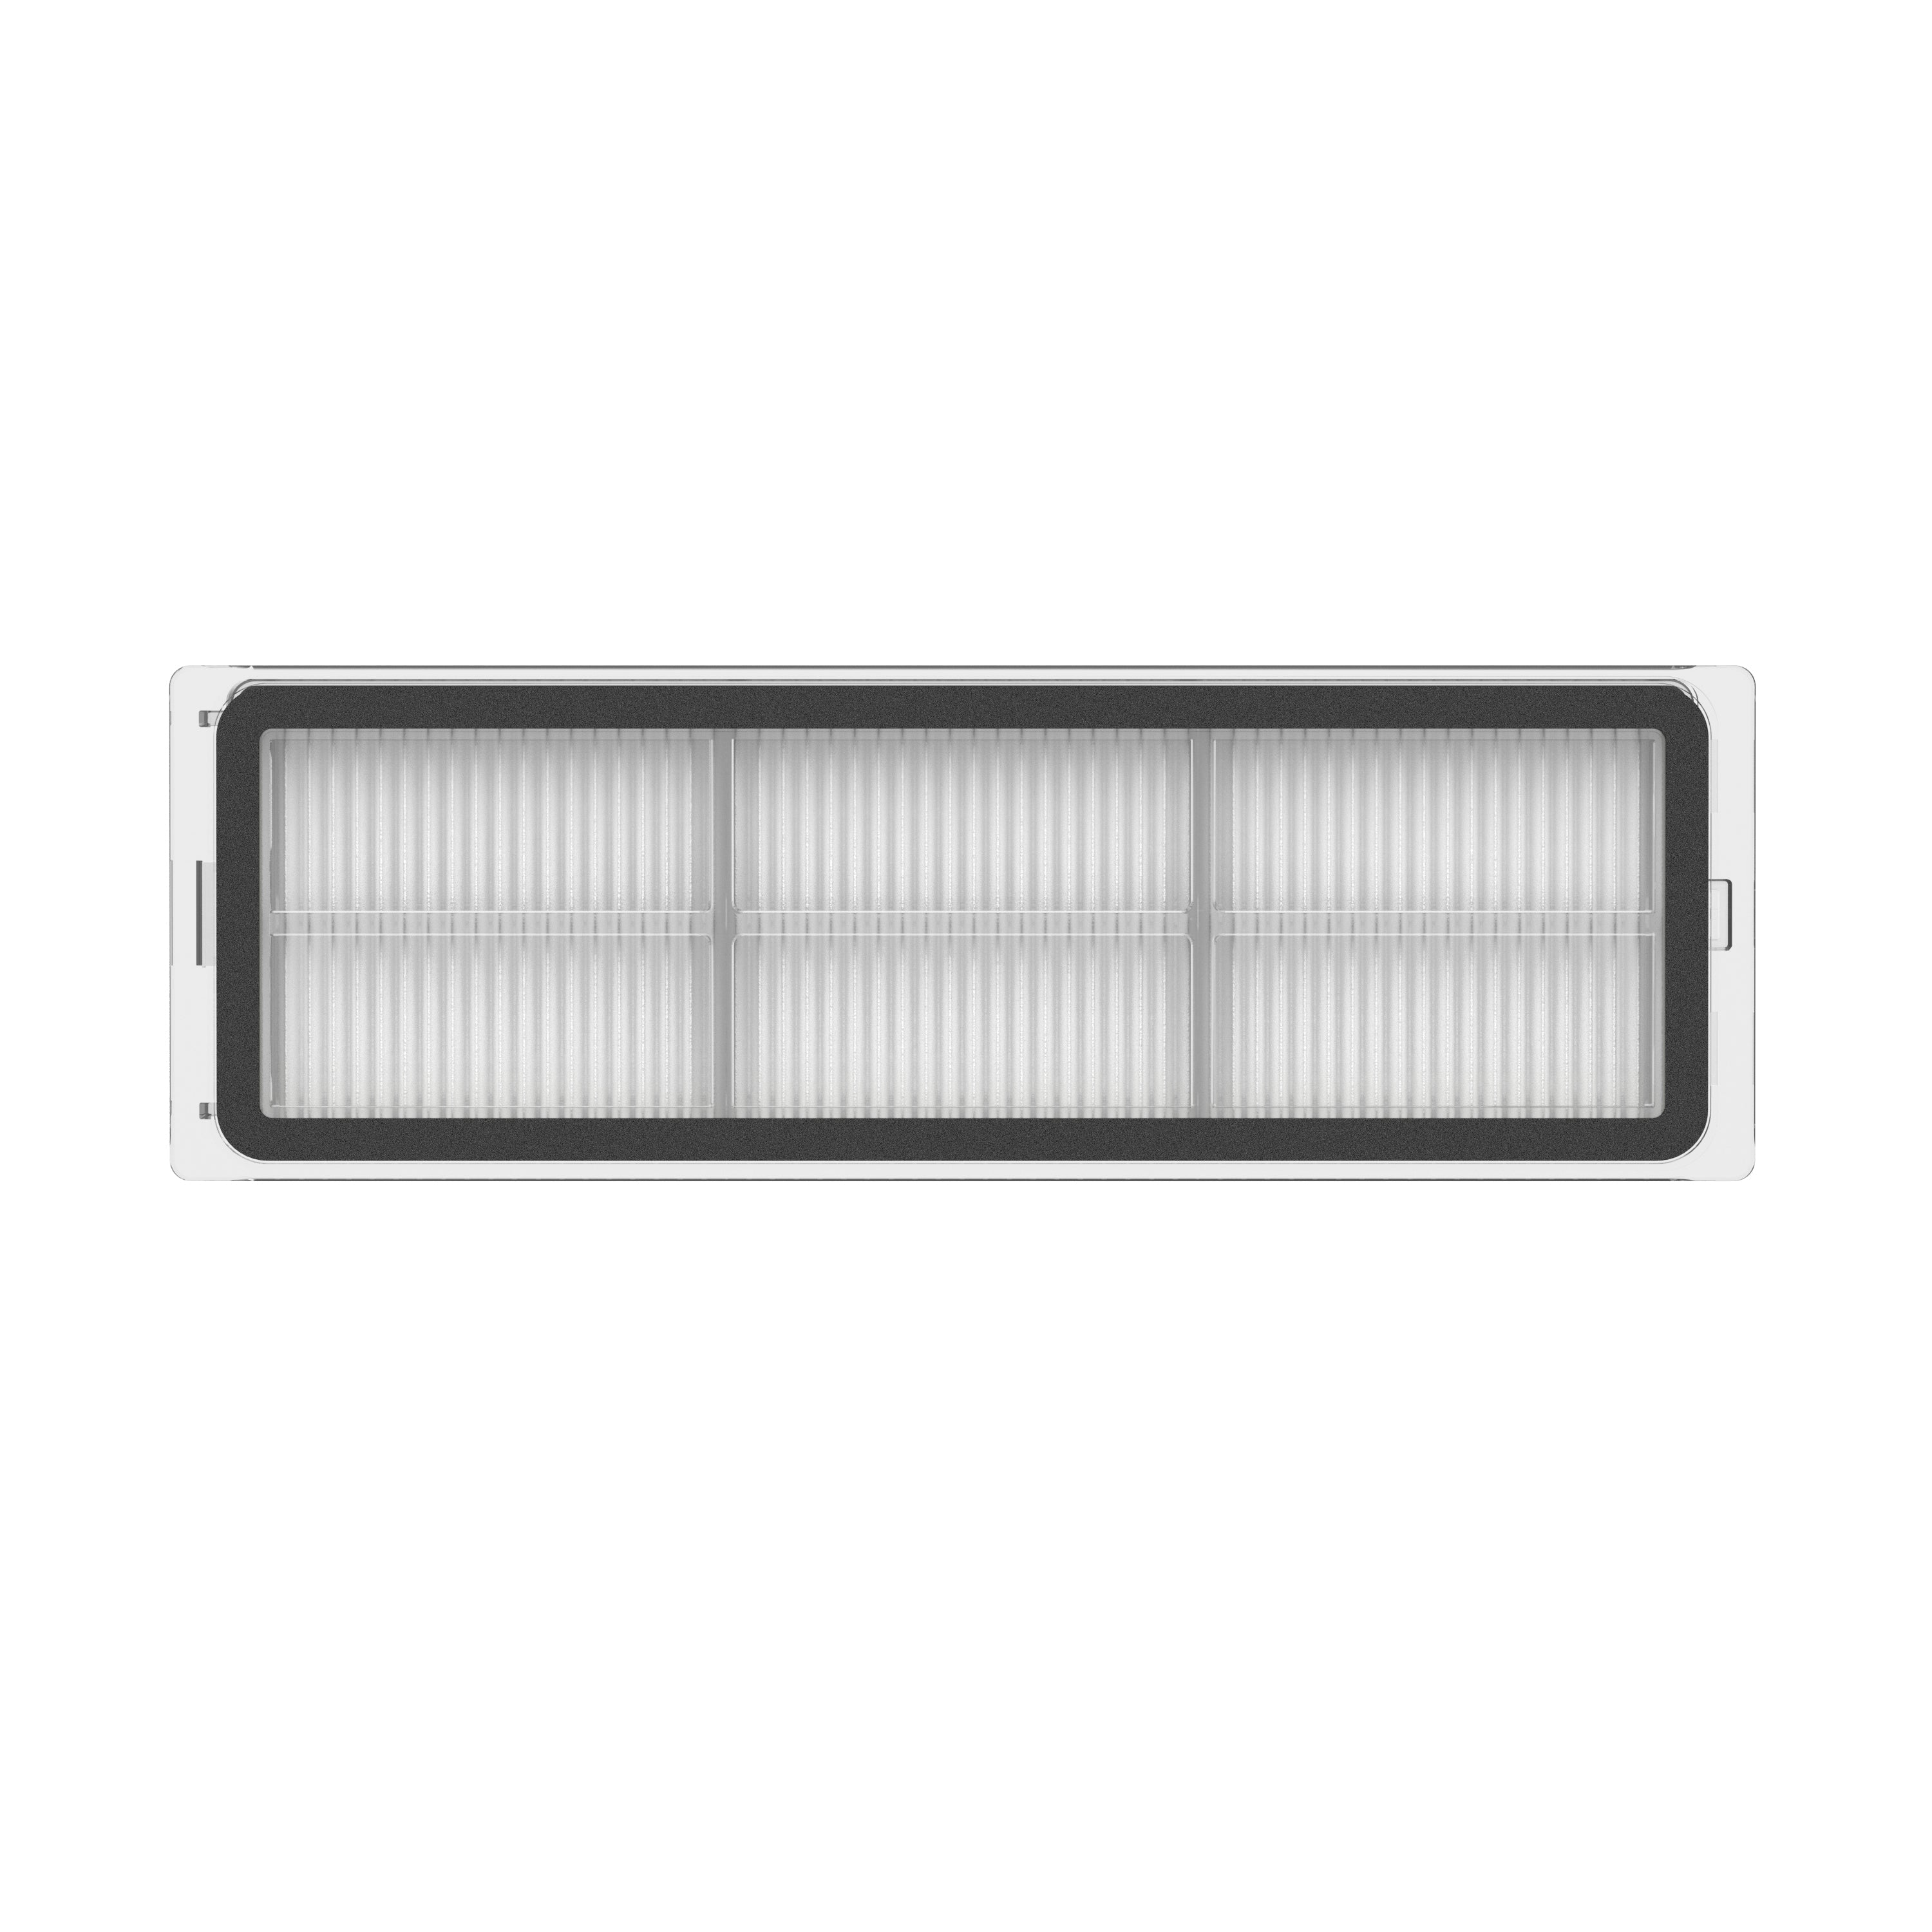 Filters (2-pack) for L10s Ultra/Z10 Pro/D10s Plus